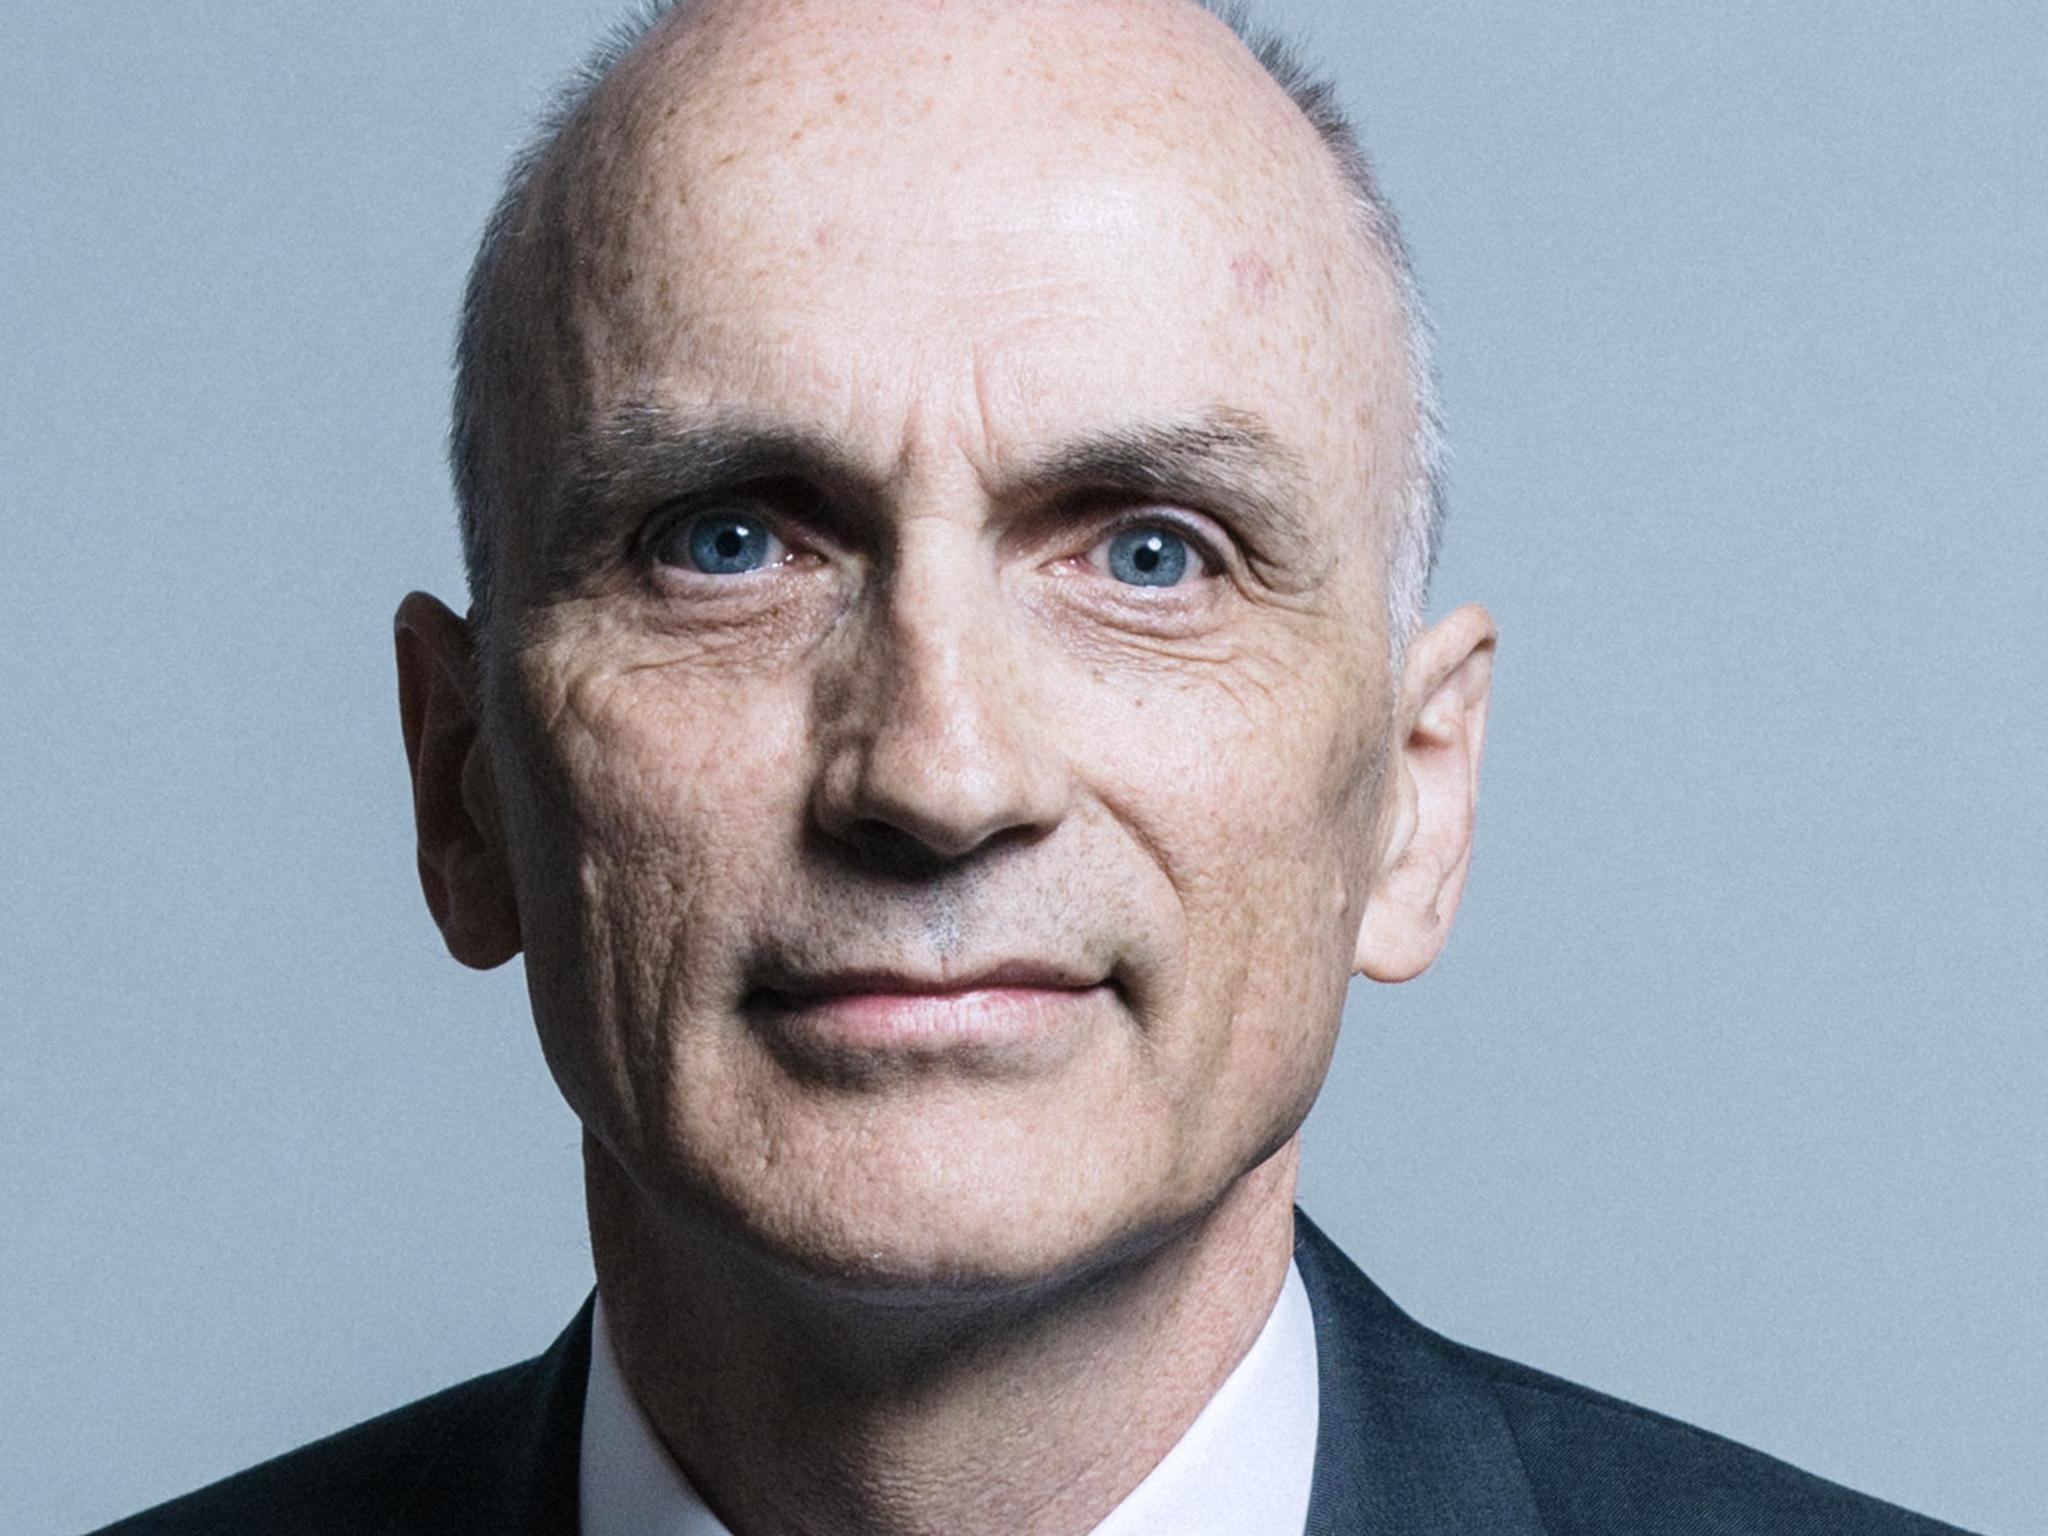 Chris Williamson has resigned from Labour's frontbench